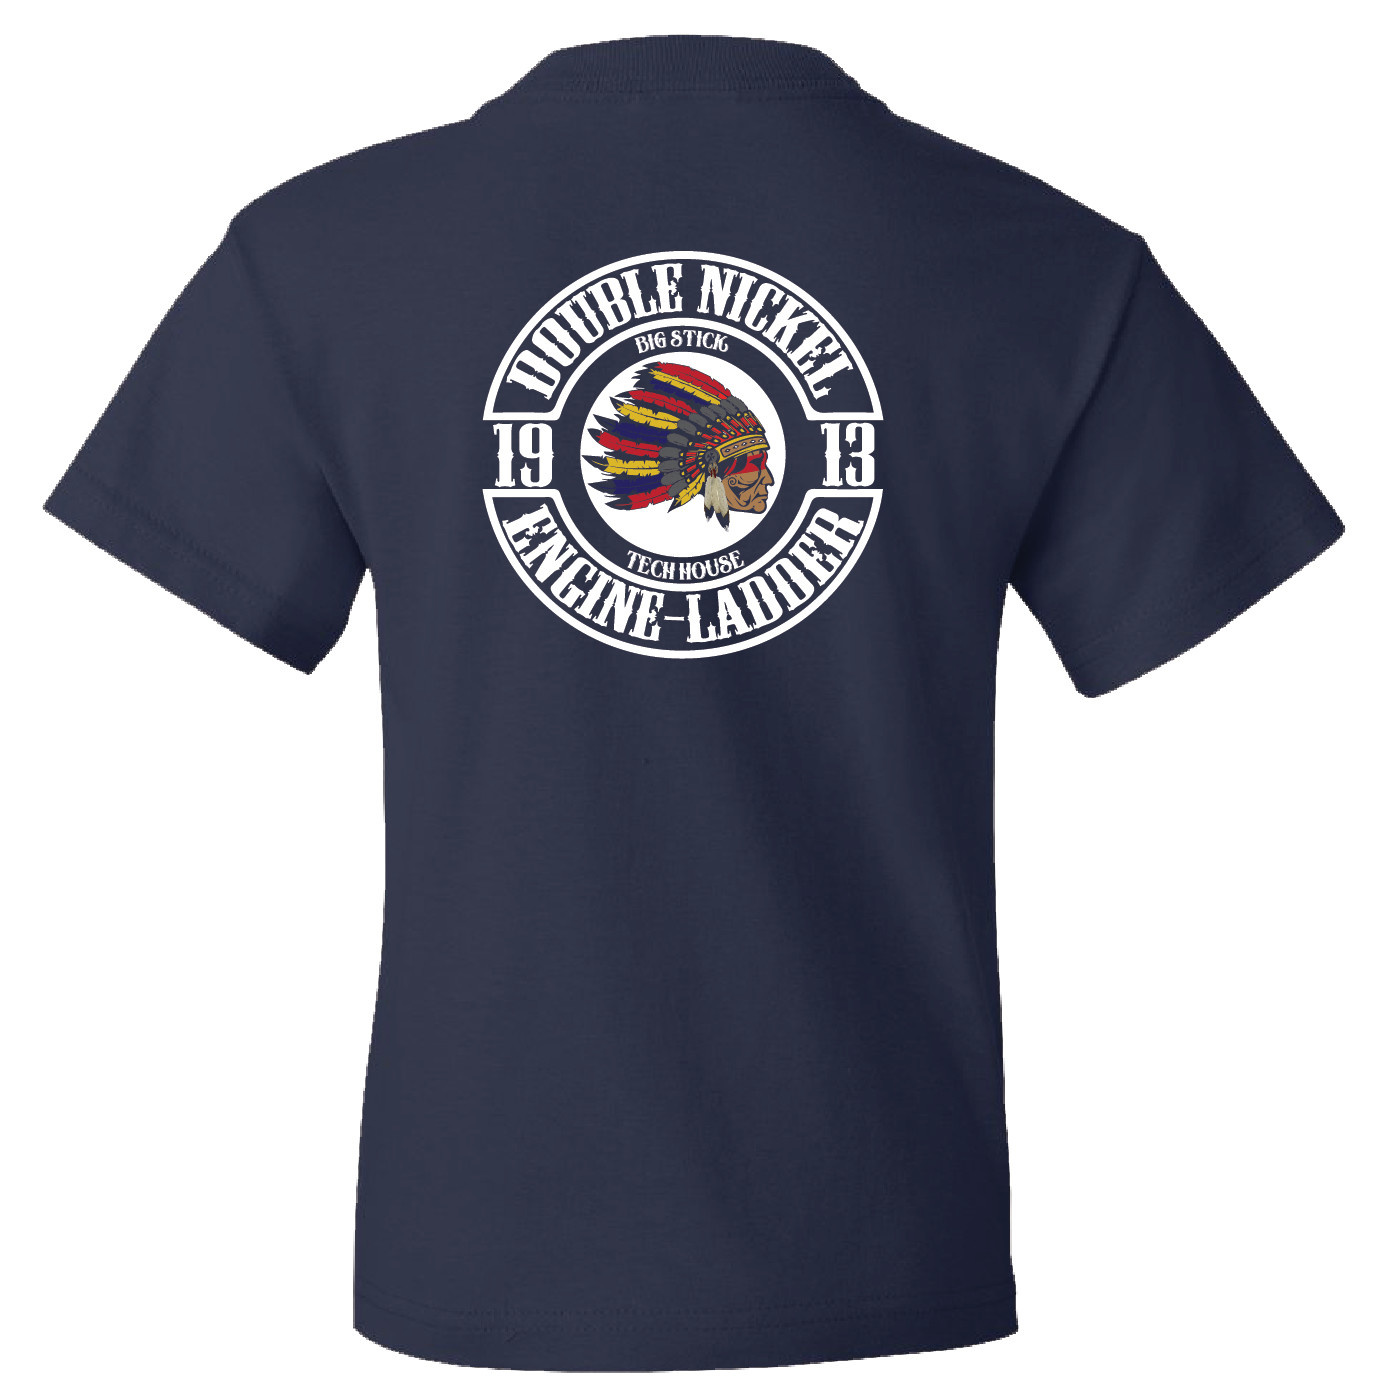 Fruit of the Loom Adult Cotton T-Shirt (Navy)